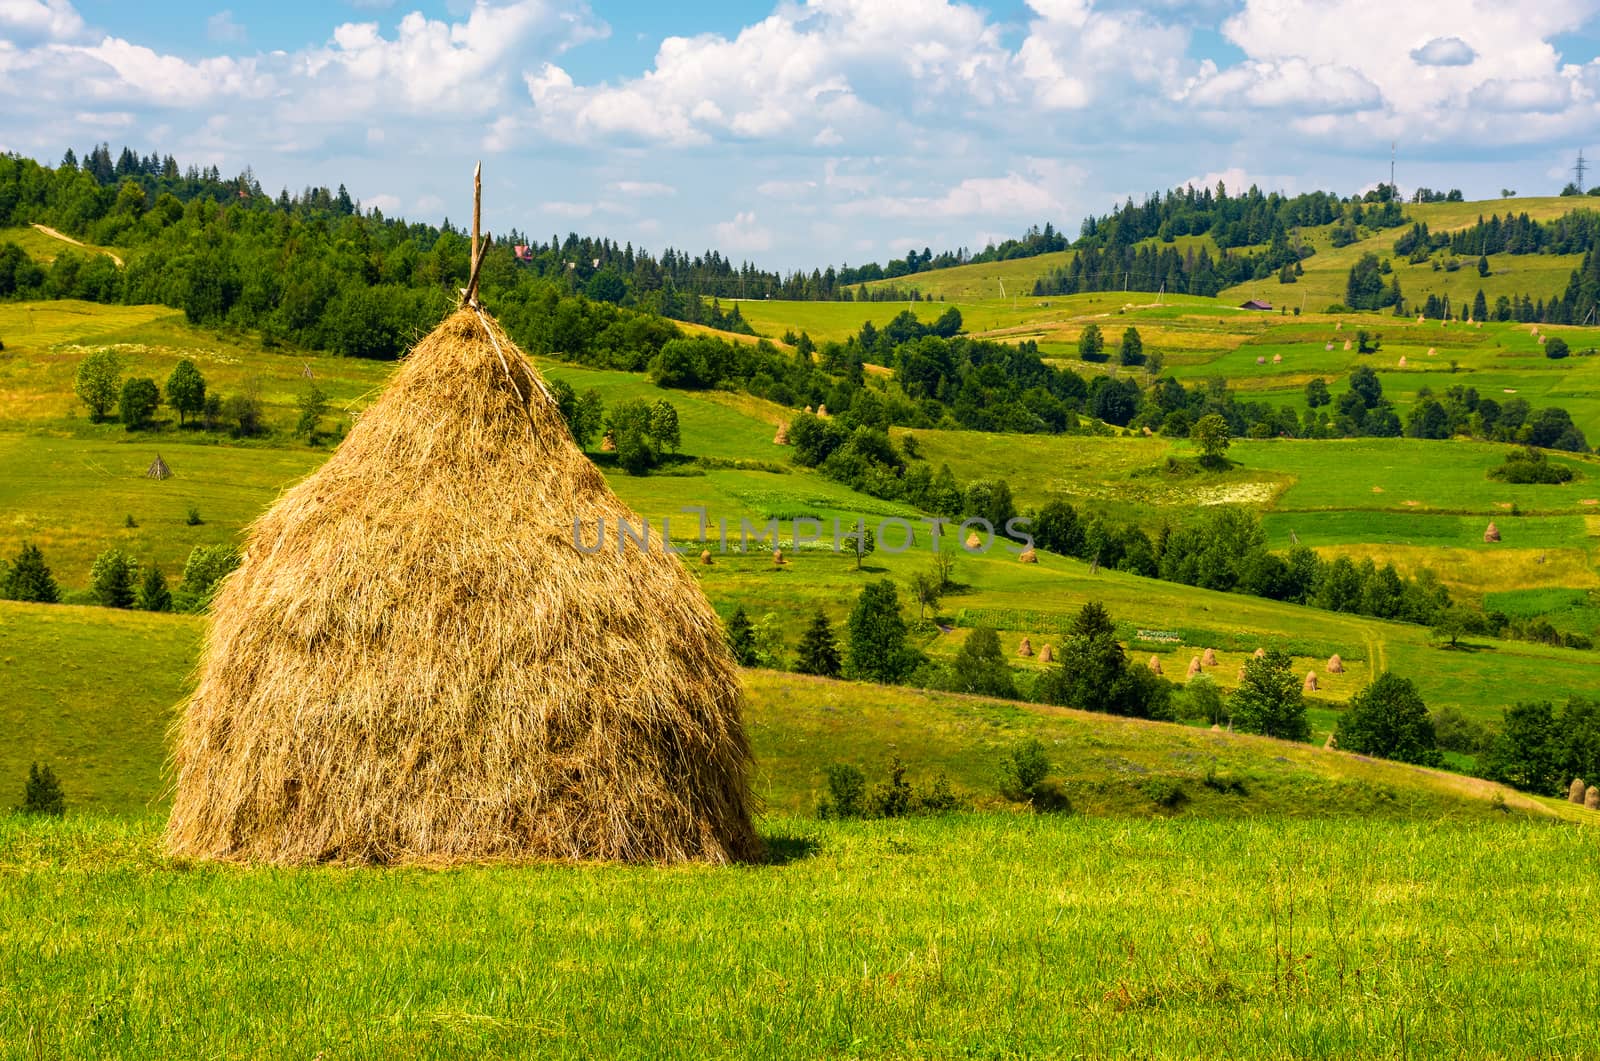 haystack on the grassy field by Pellinni